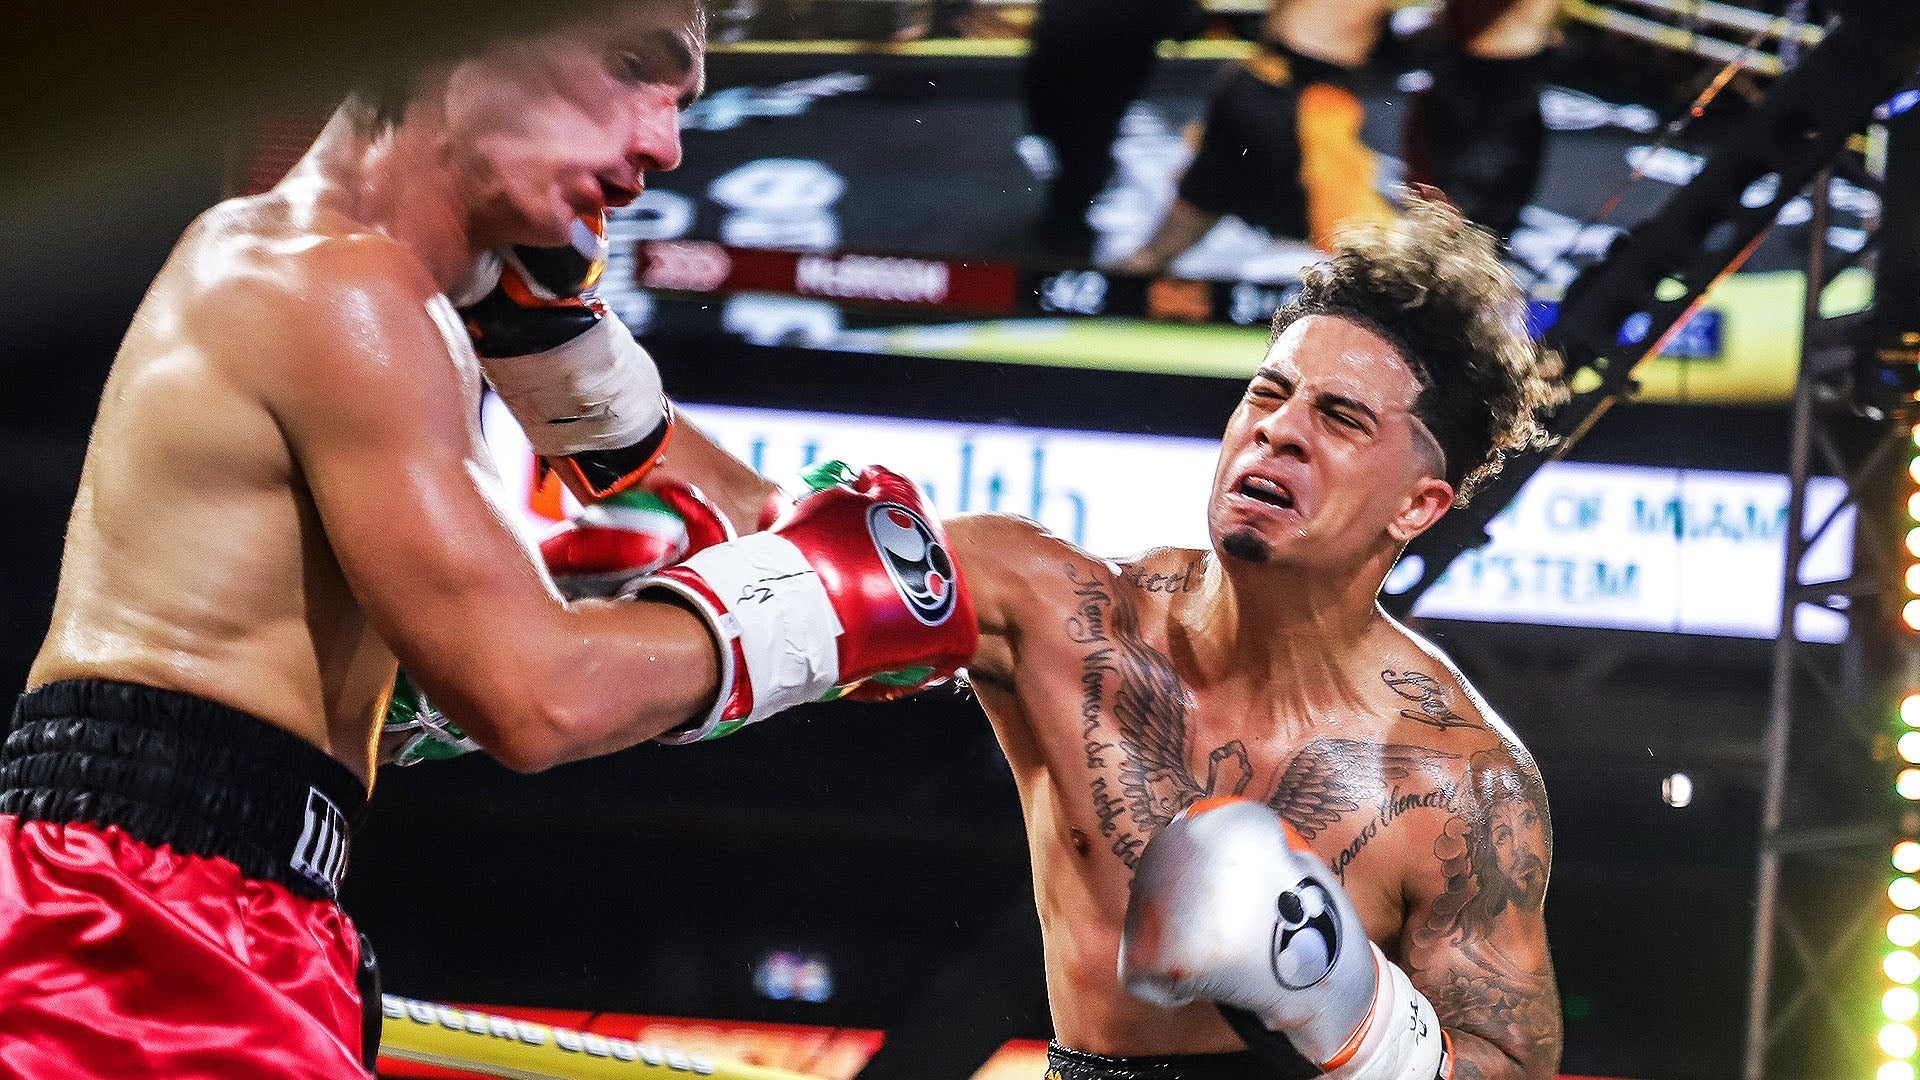 Bryce Hall Gets Knocked Out By Austin McBroom in 'Battle of the.